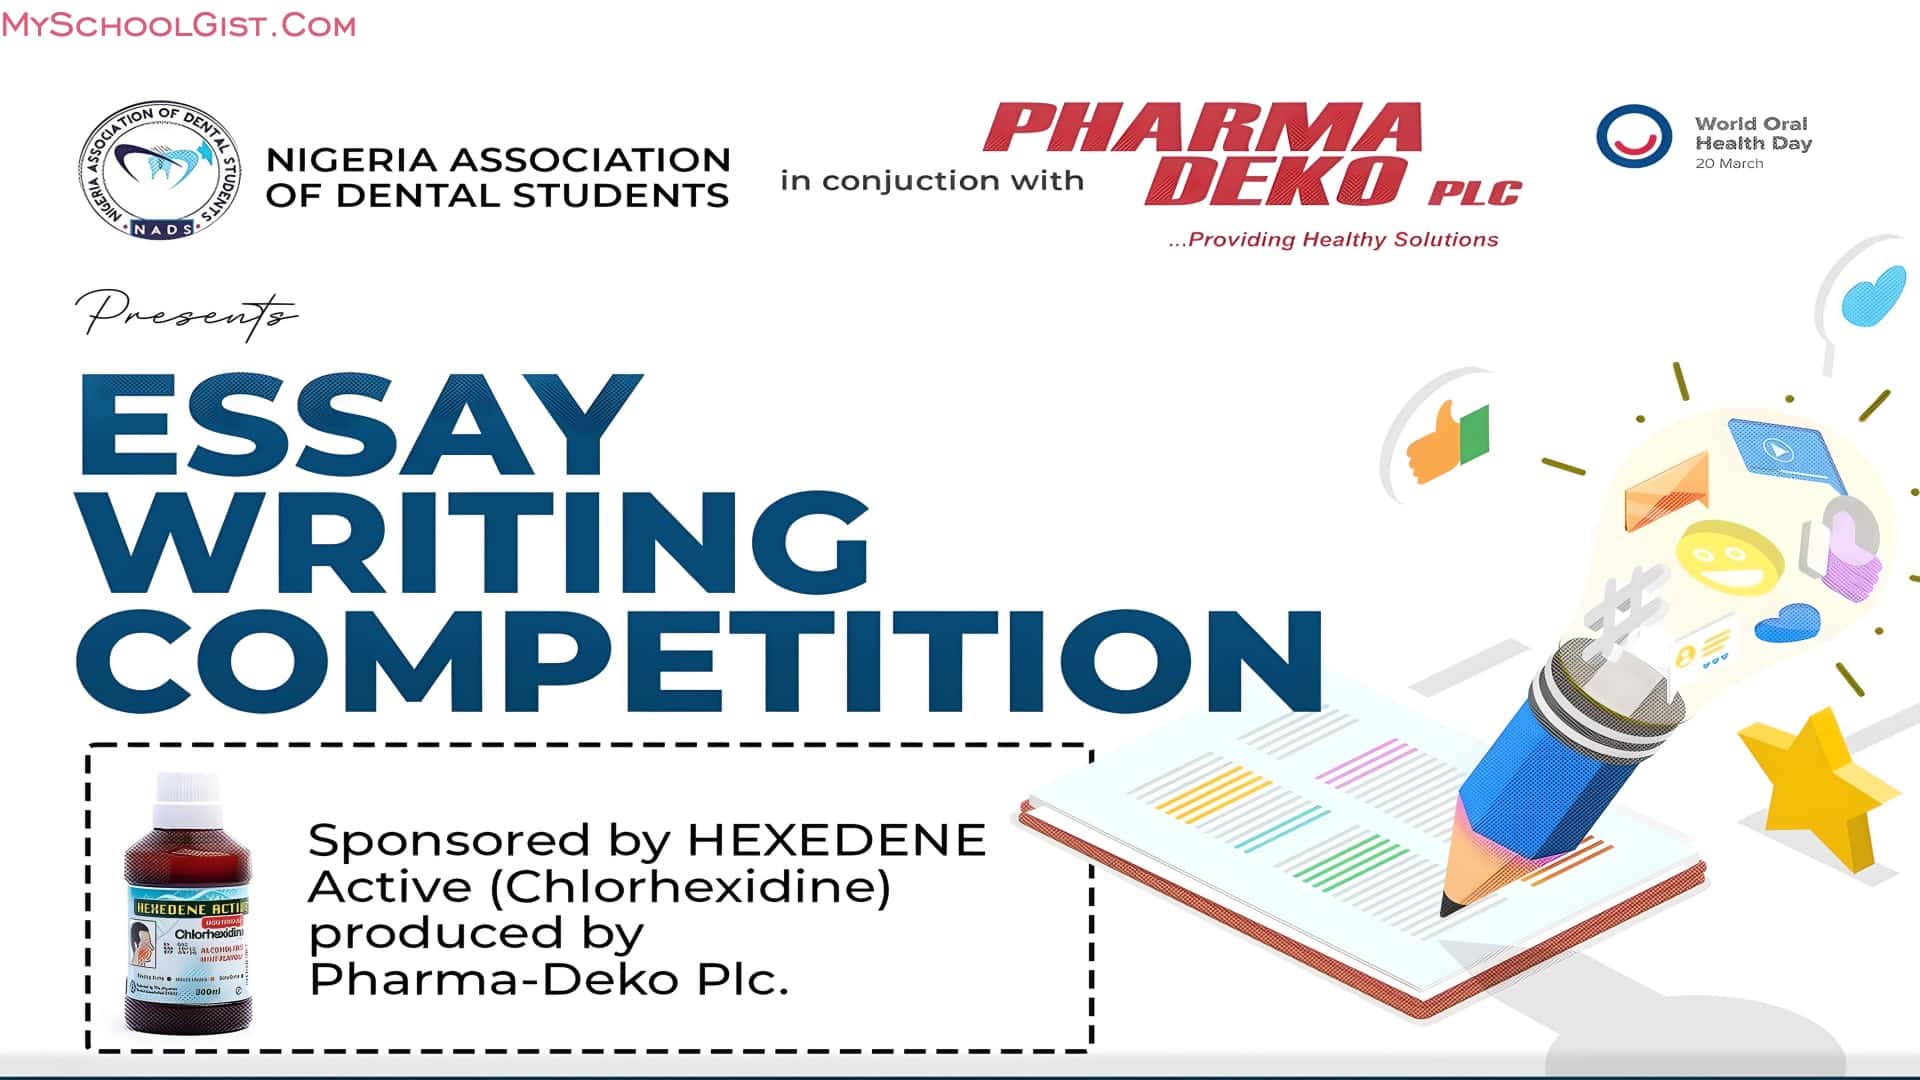 Nigeria Association of Dental Students (NADS) Essay Writing Competition